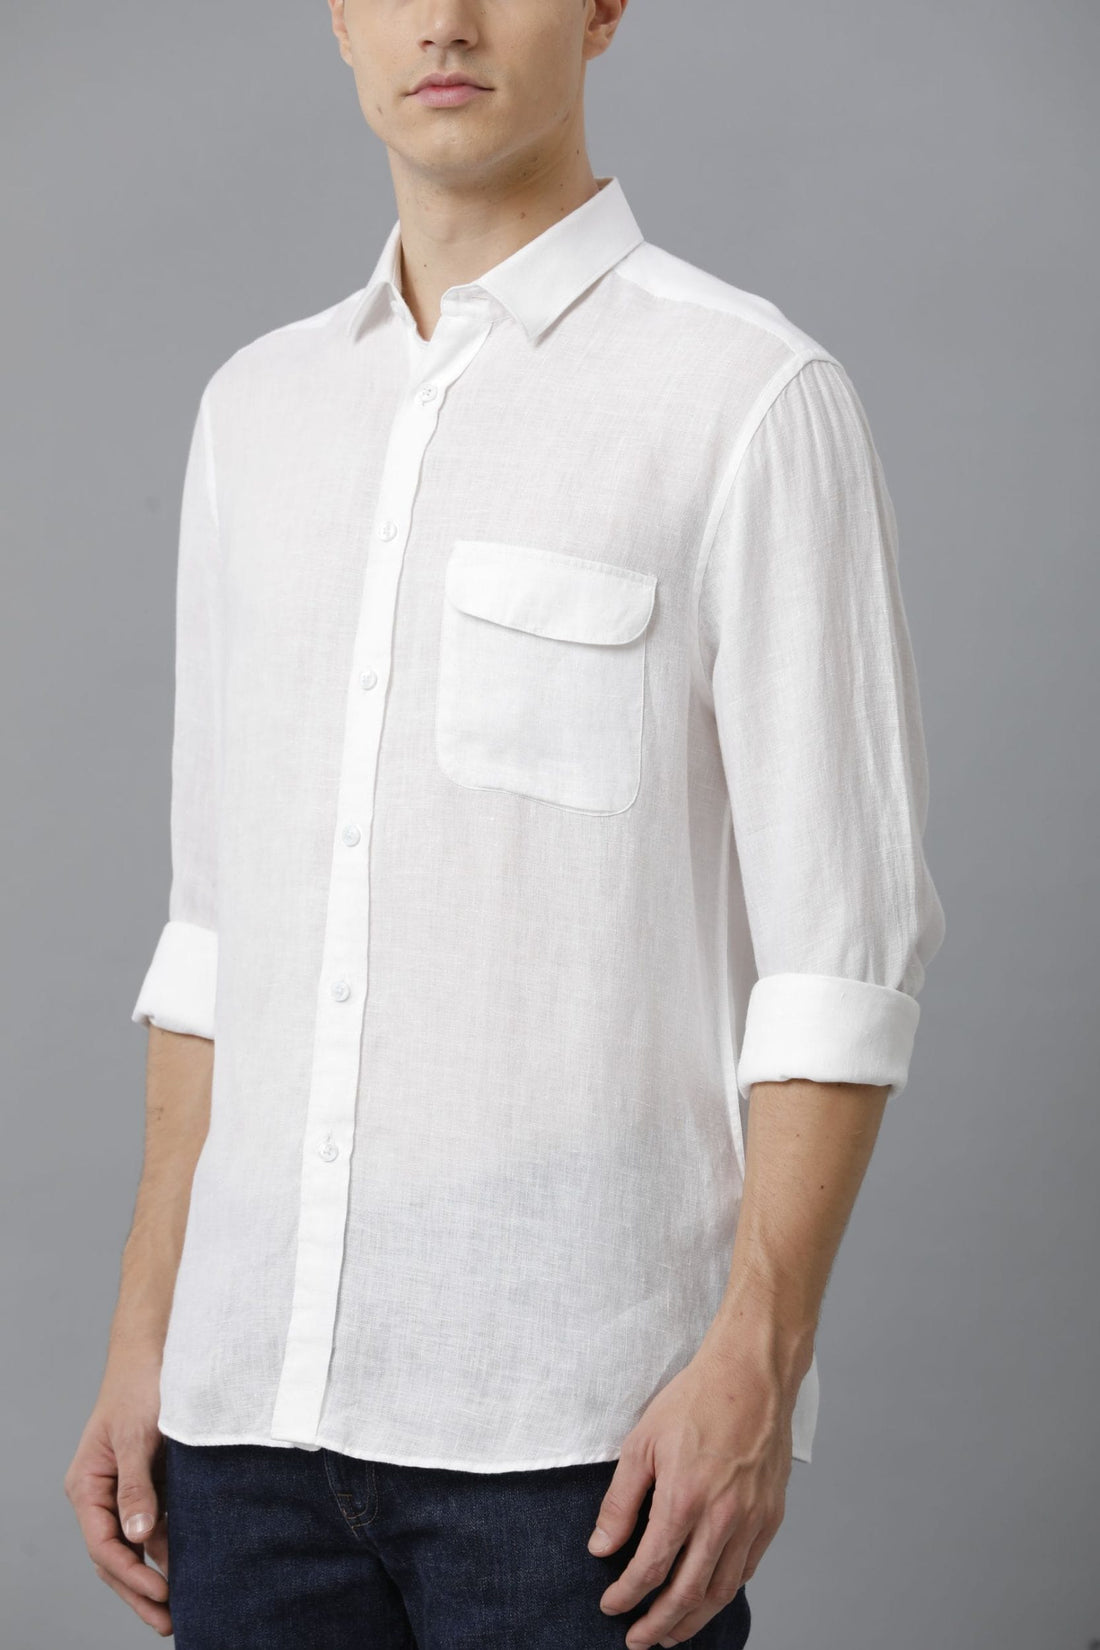 Solid Linen White Casual Shirt